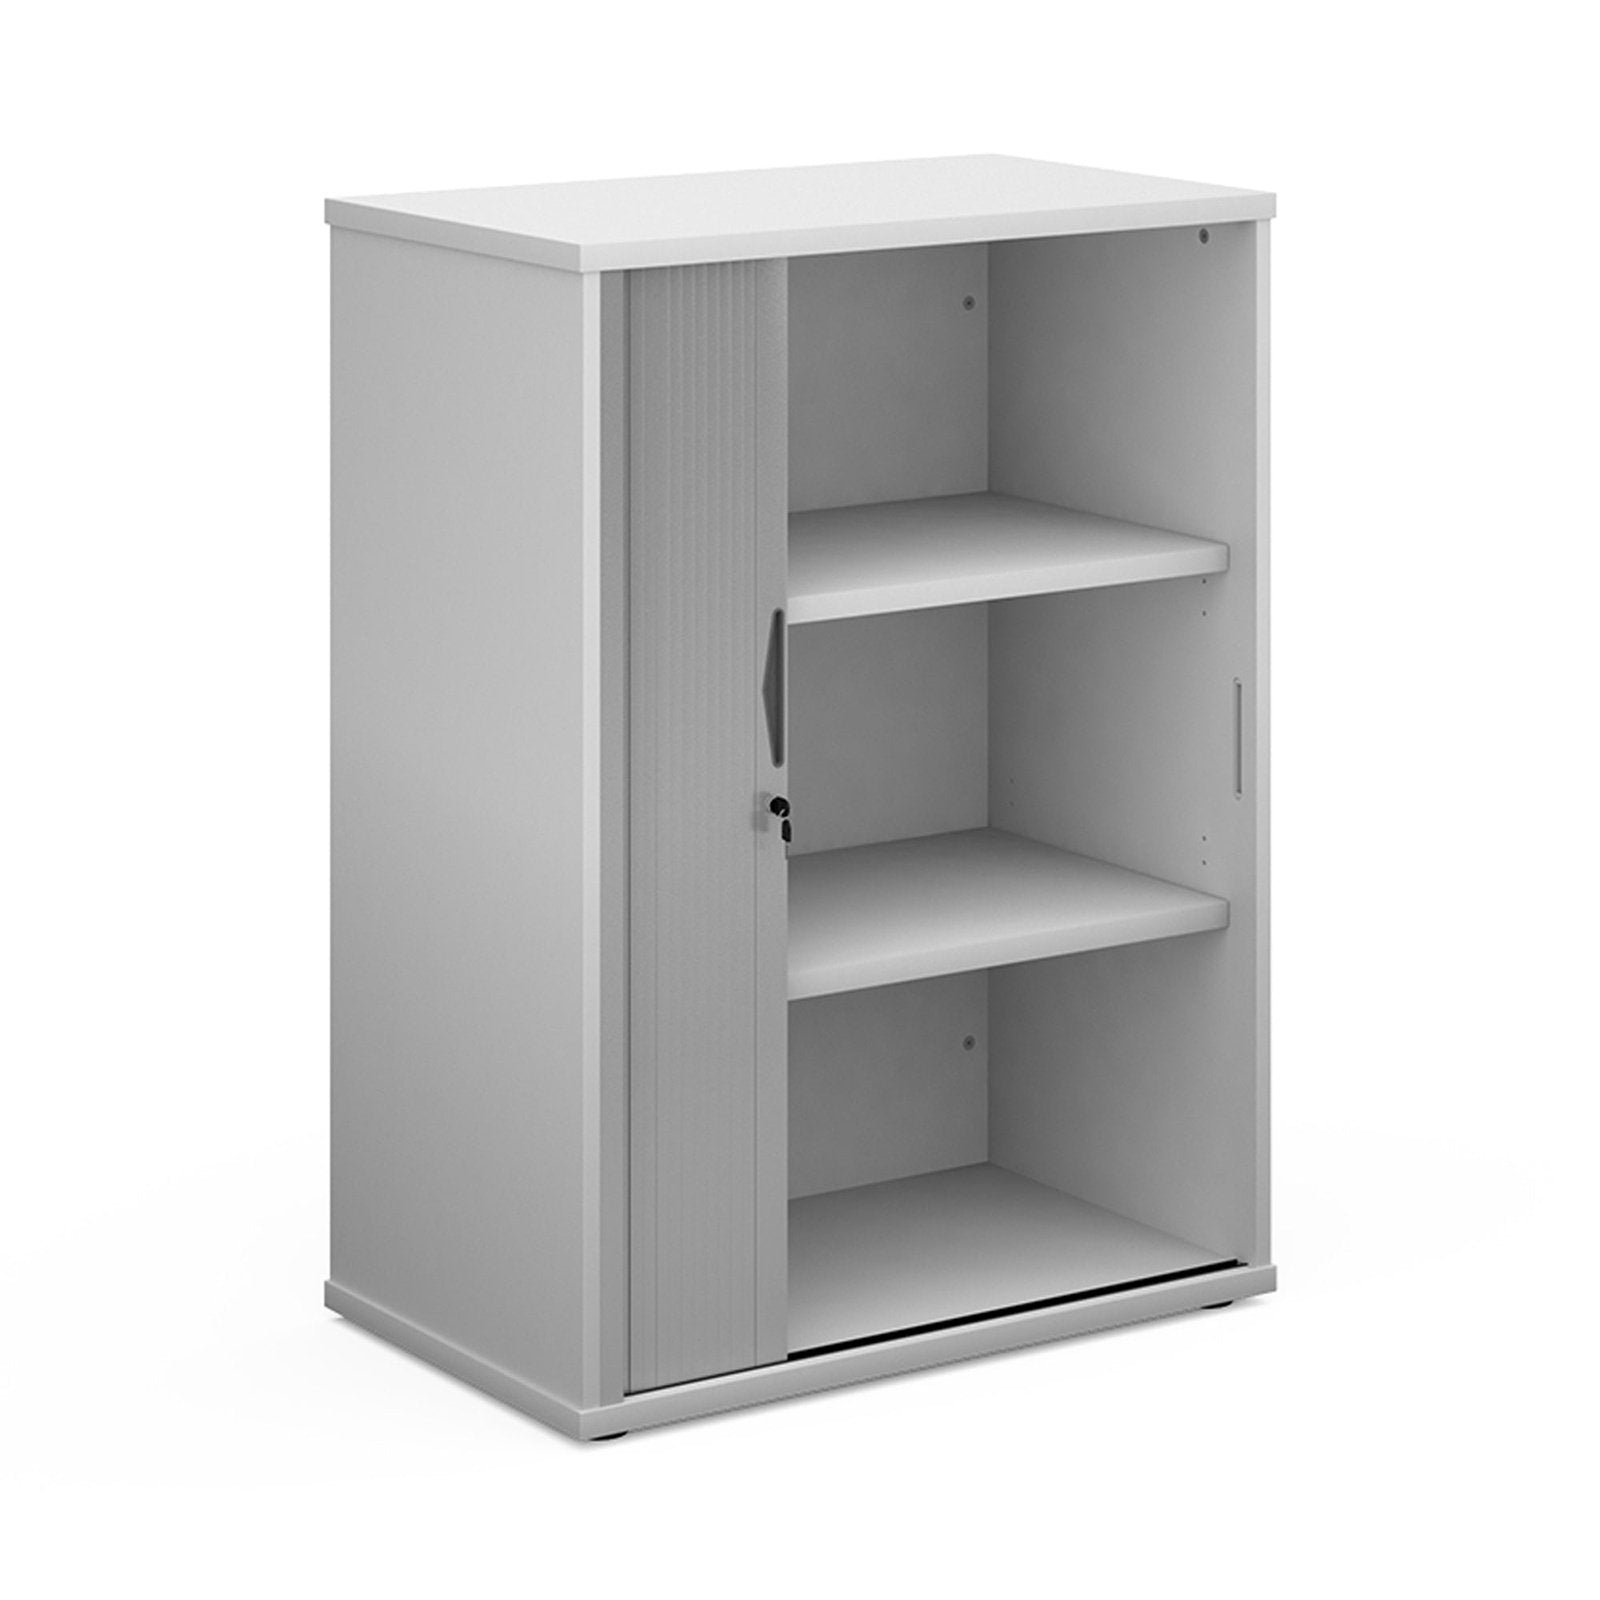 Universal single tambour cupboard with silver door - Office Products Online